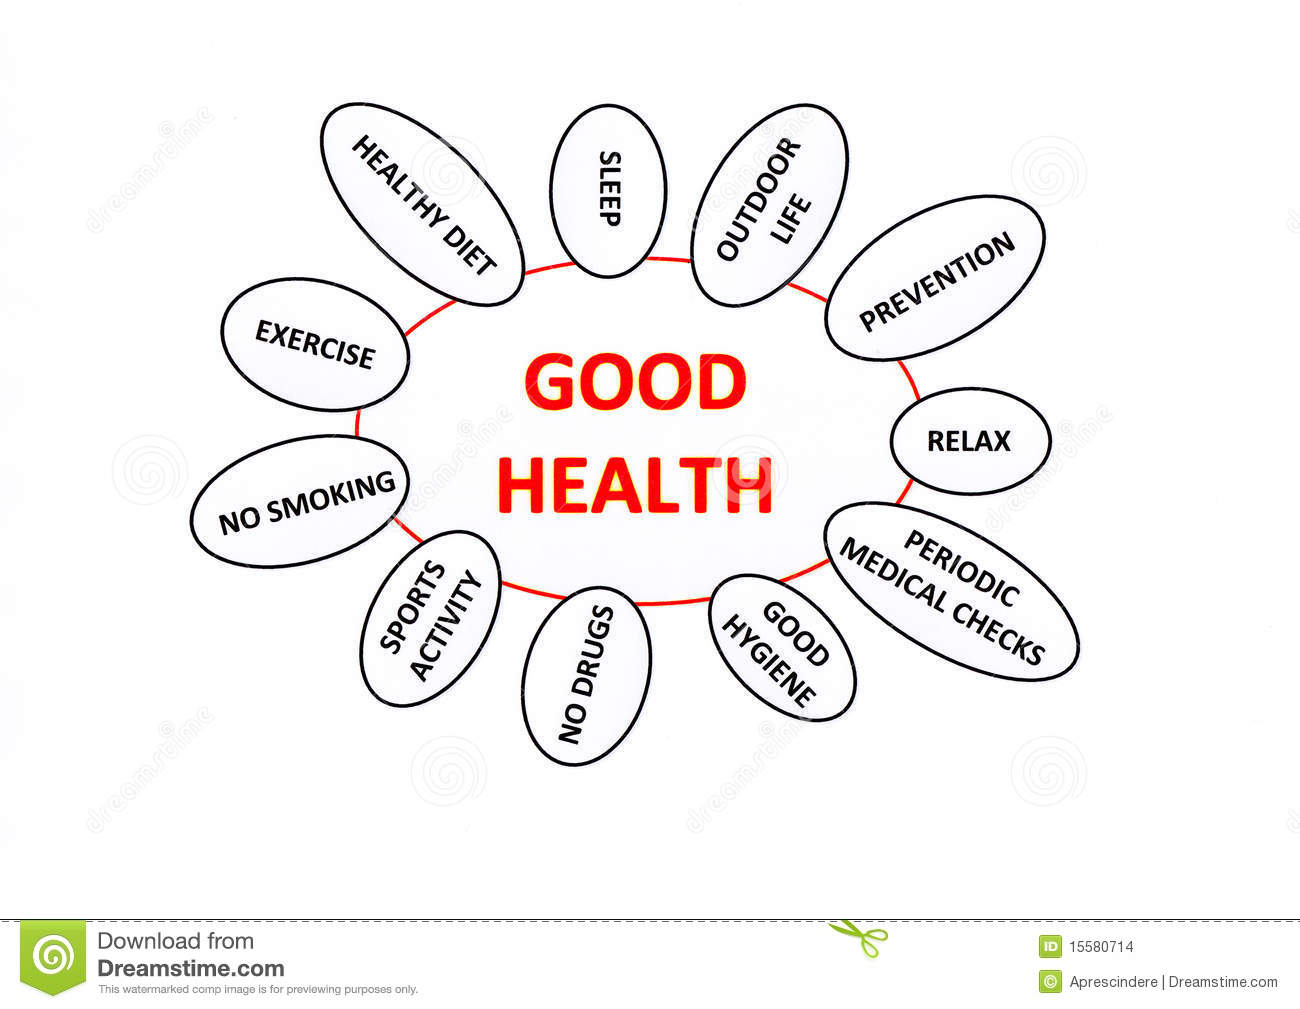 Good Health Concept With Some Possible Related Topics Or Themes   The